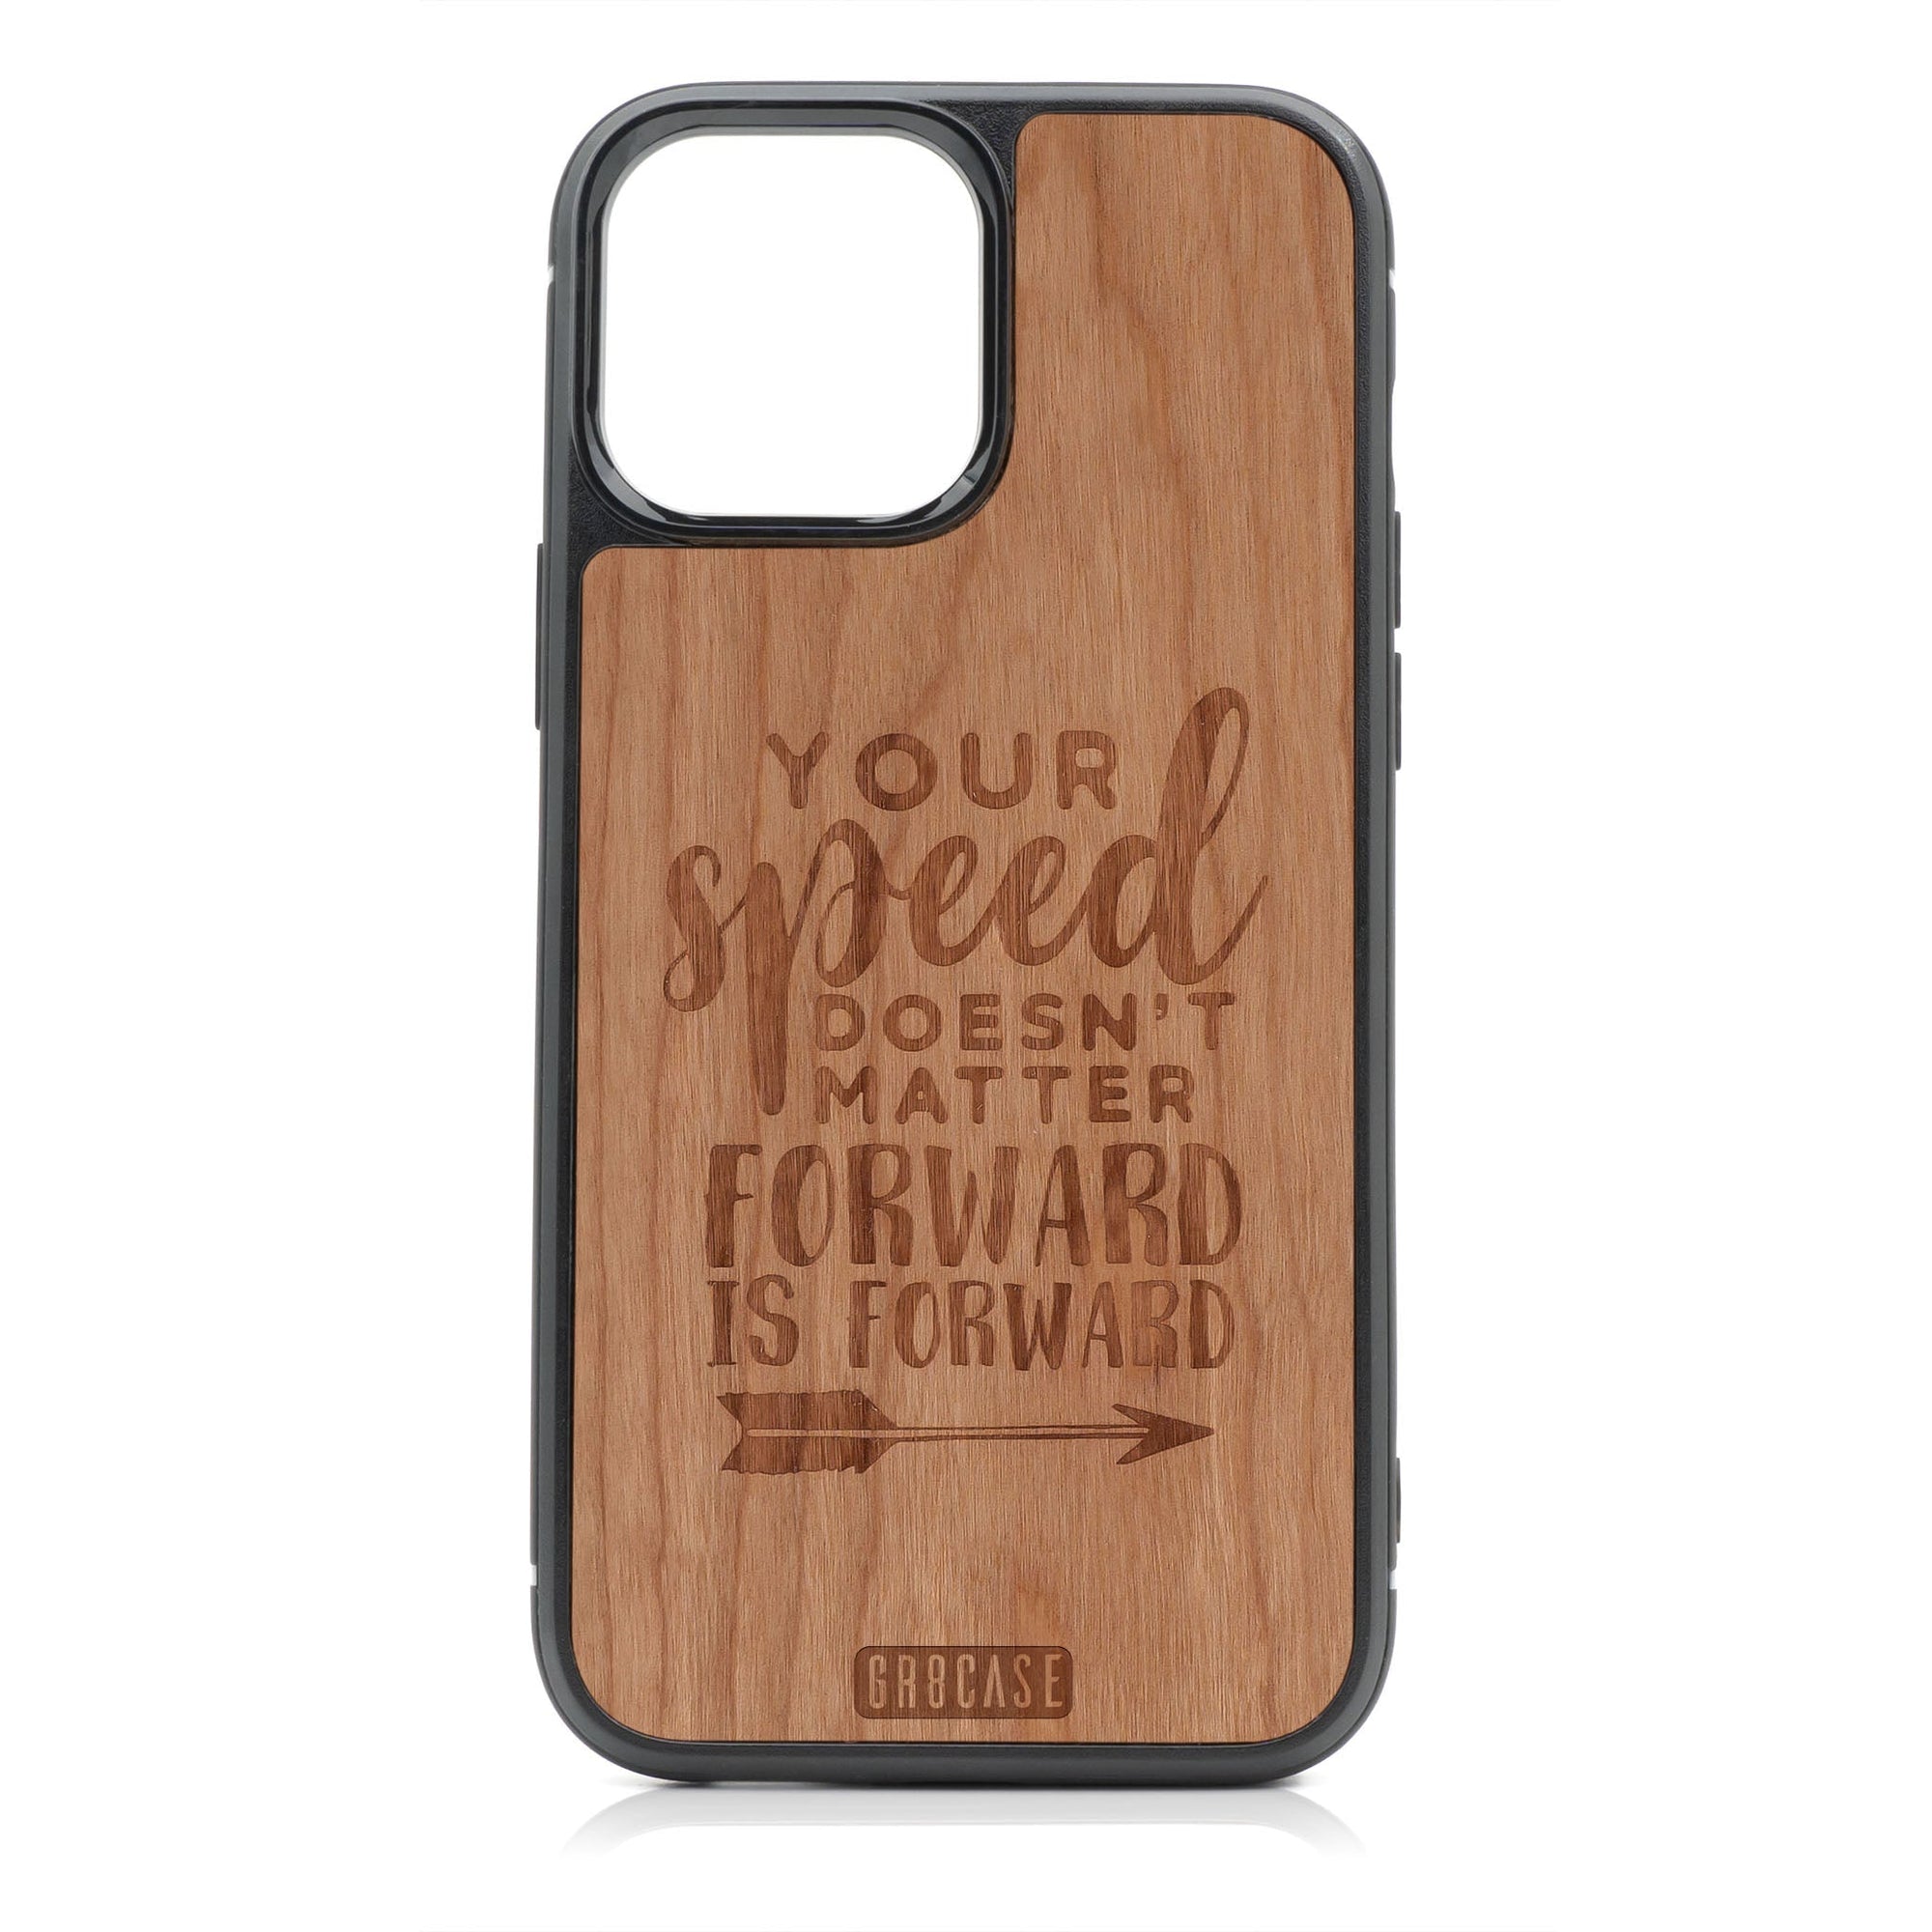 Your Speed Doesn't Matter Forward Is Forward Design Wood Case For iPhone 15 Pro Max